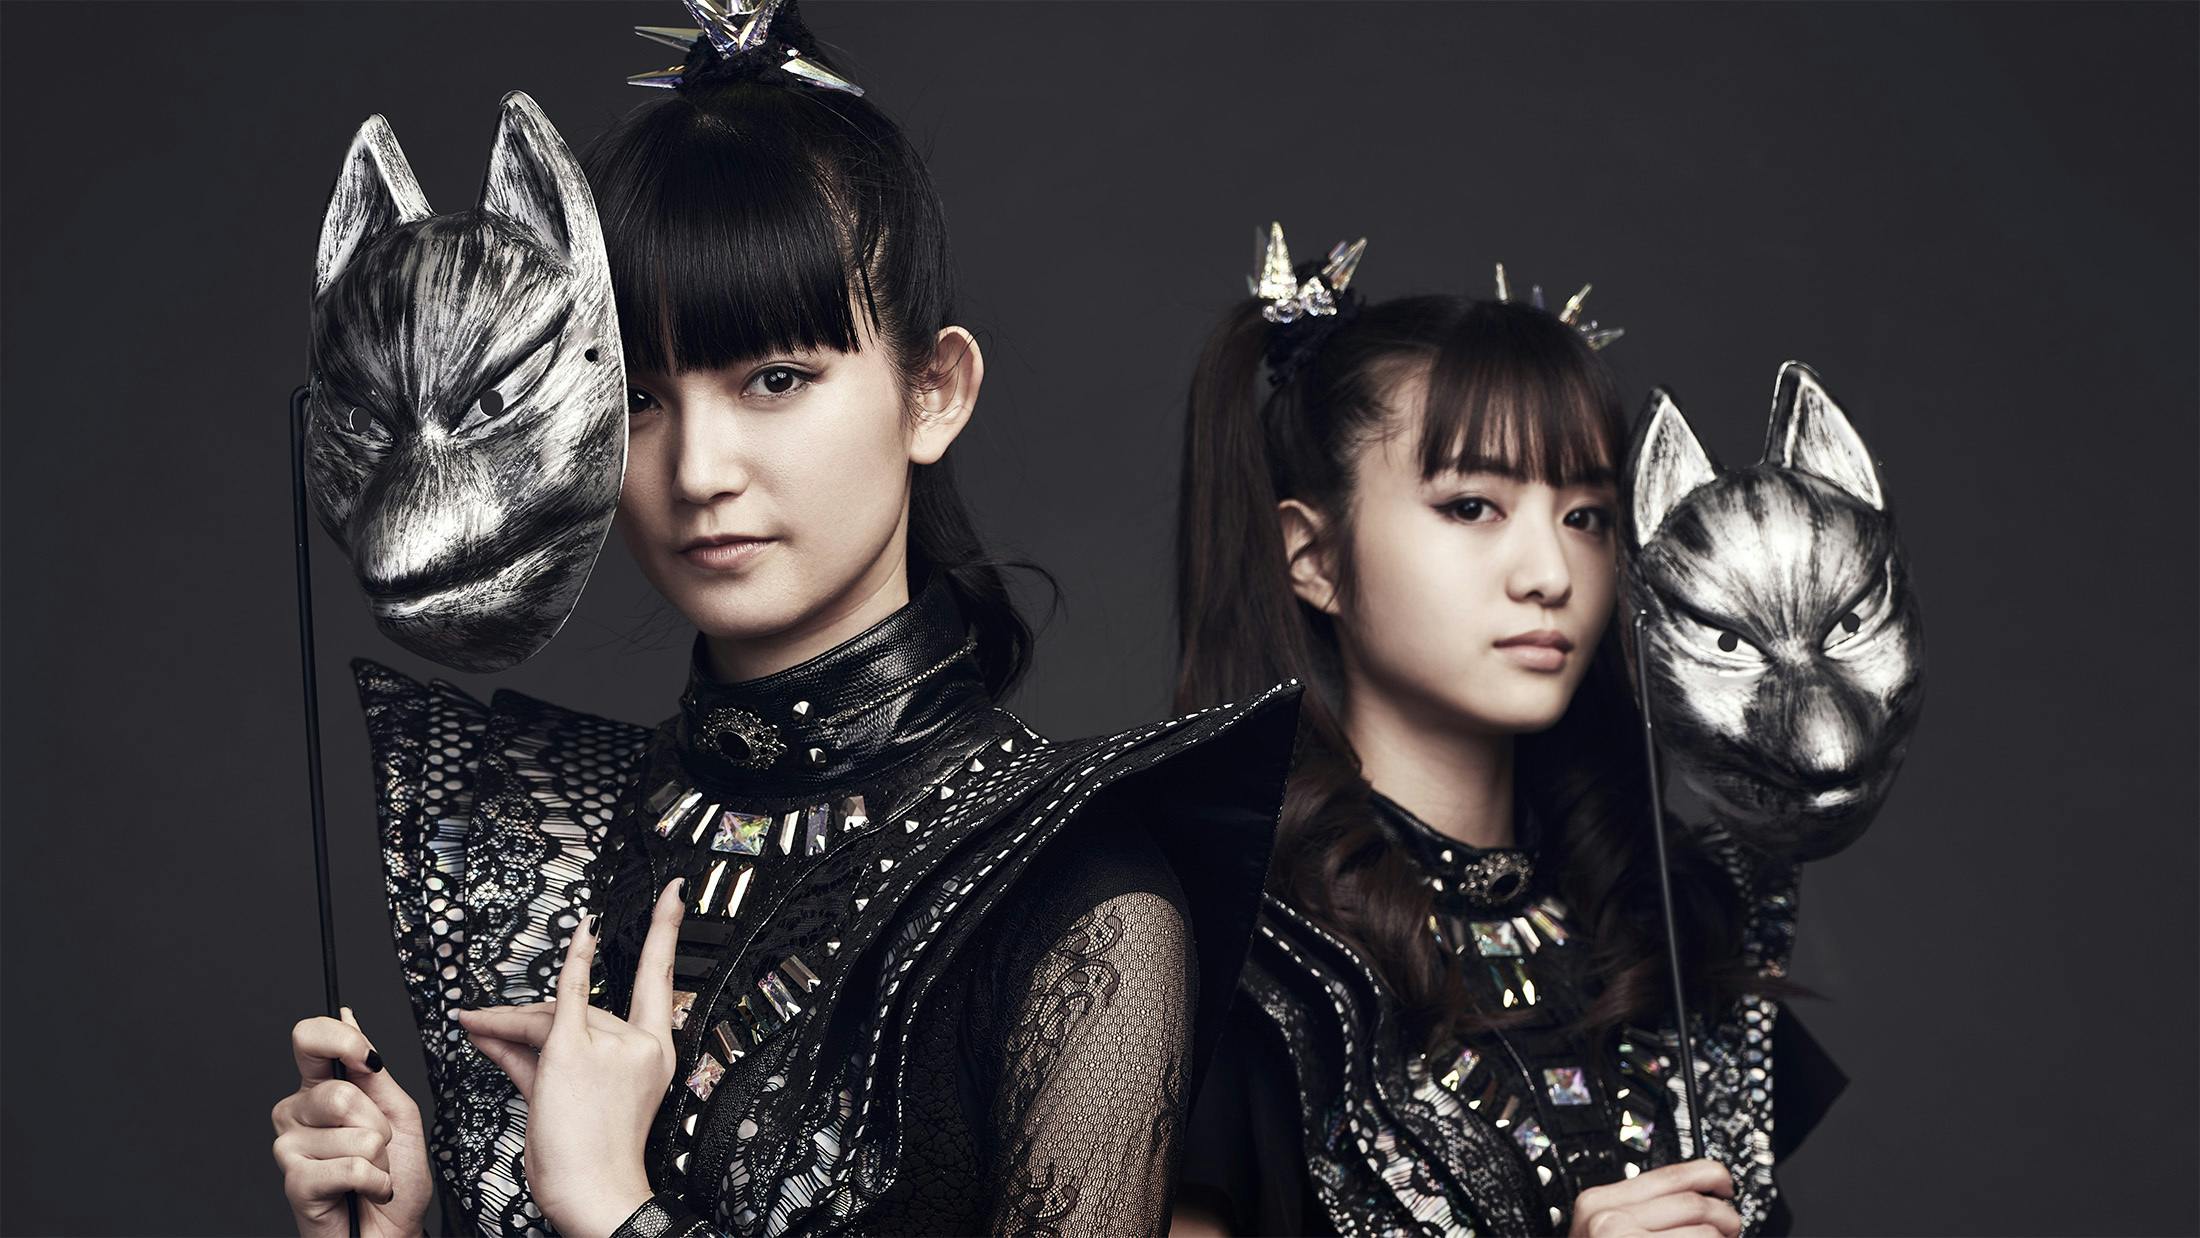 BABYMETAL: "Communication Became Much More Important To Us This Year"